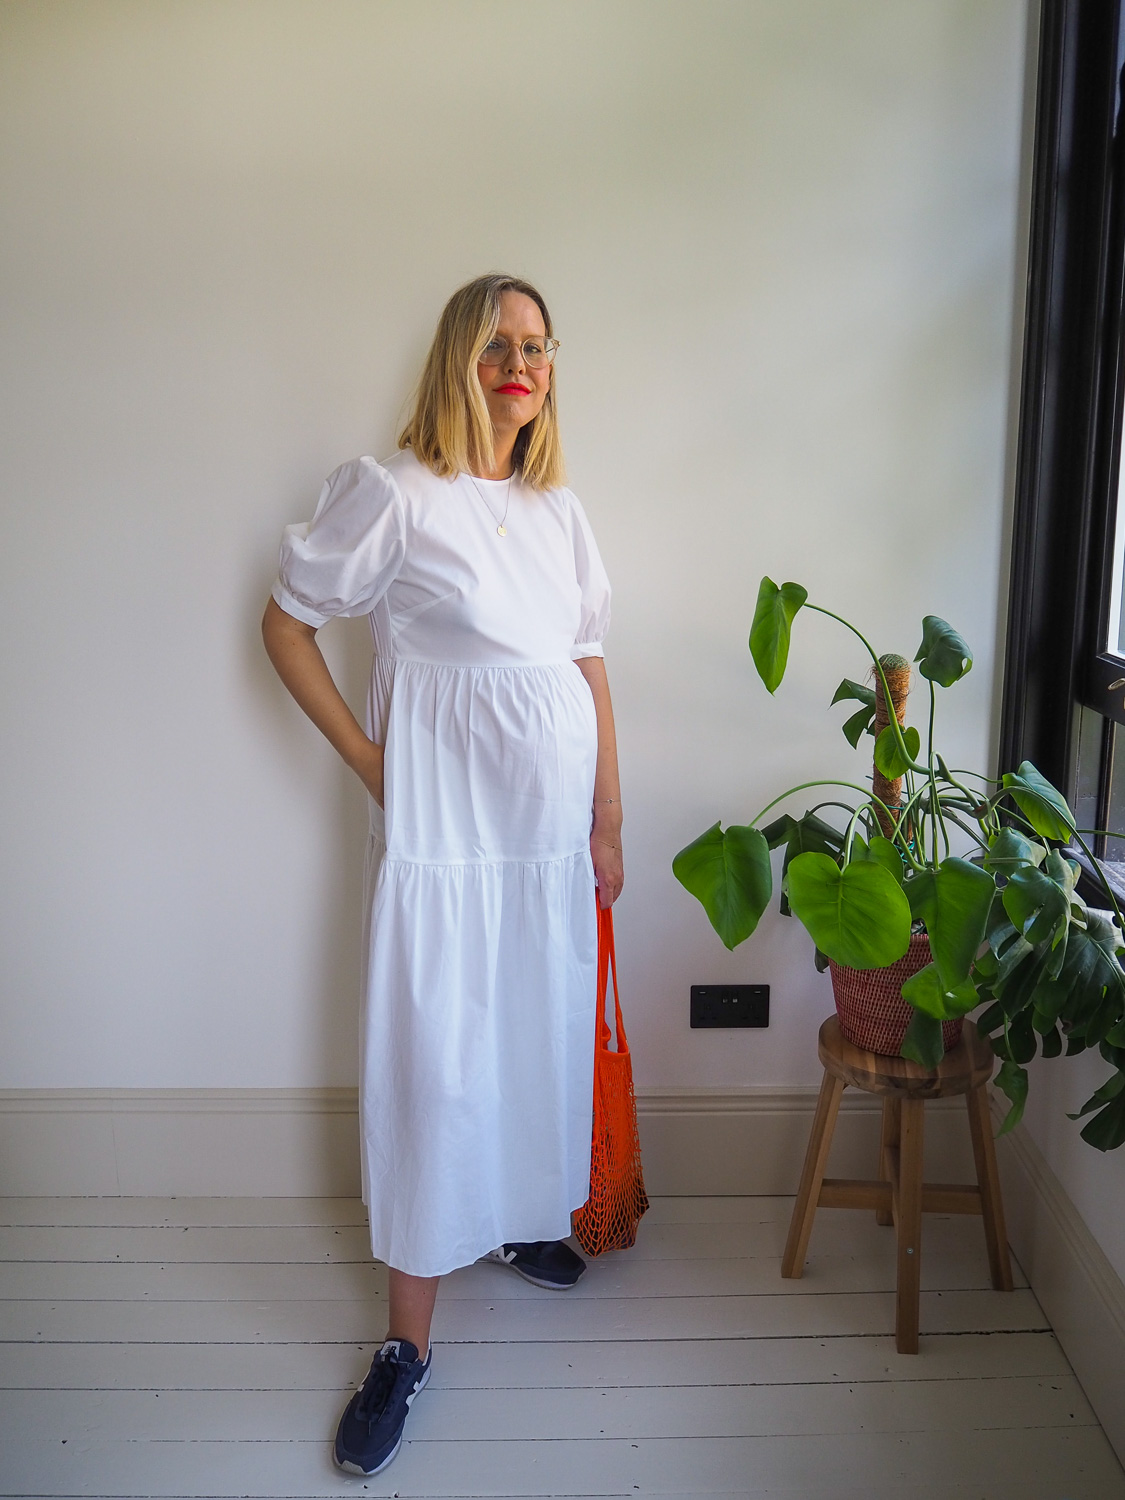 The Frugality white maternity dress